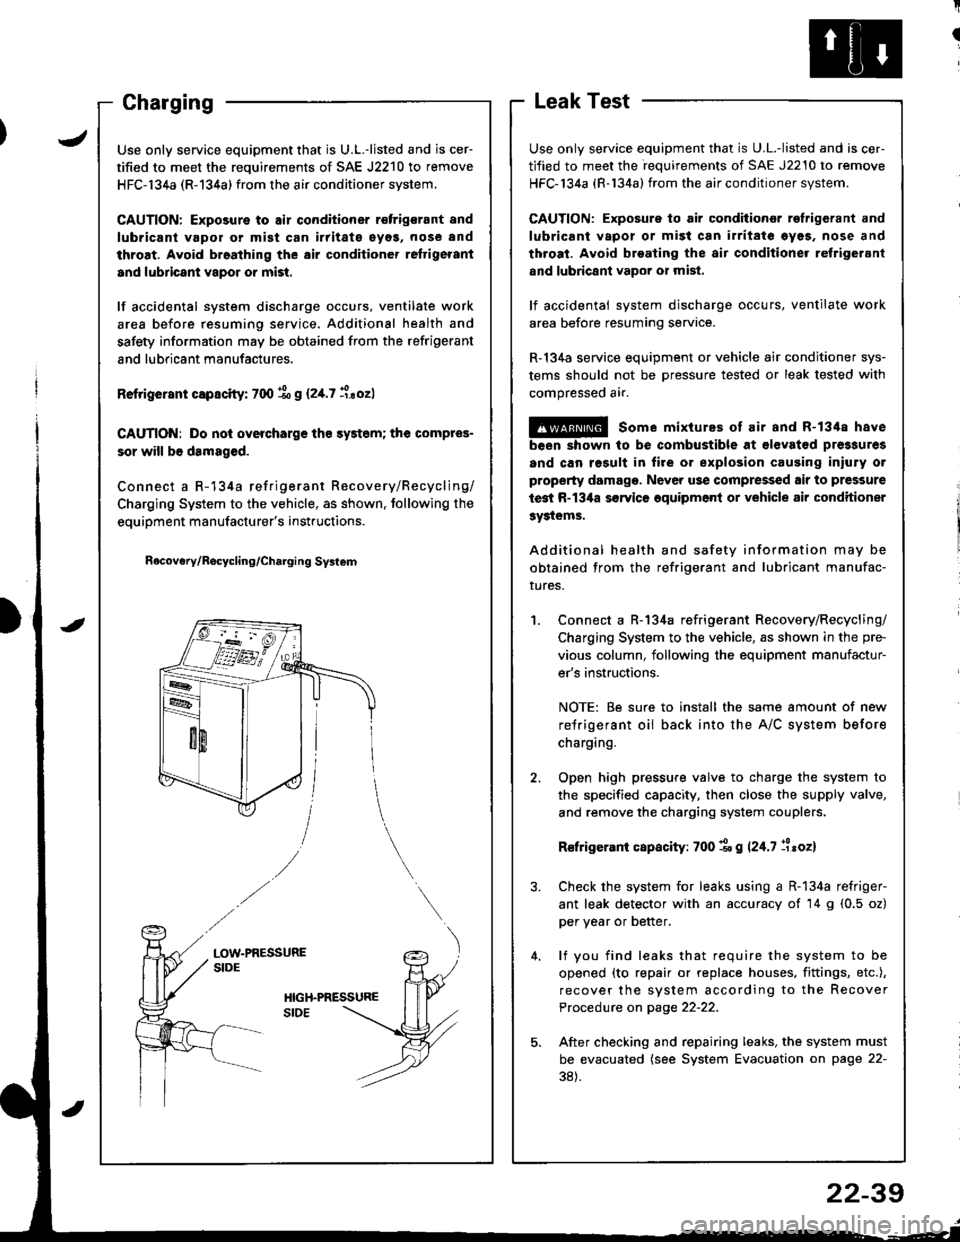 HONDA INTEGRA 1998 4.G Workshop Manual I
I
ChargingLeak Test
Use only service equipment that is U.L.-listed and is cer-
tified to meet the requirements of SAE J2210 to remove
HFC-134a (R-134a) from the air conditioner system.
CAUTION: Expo